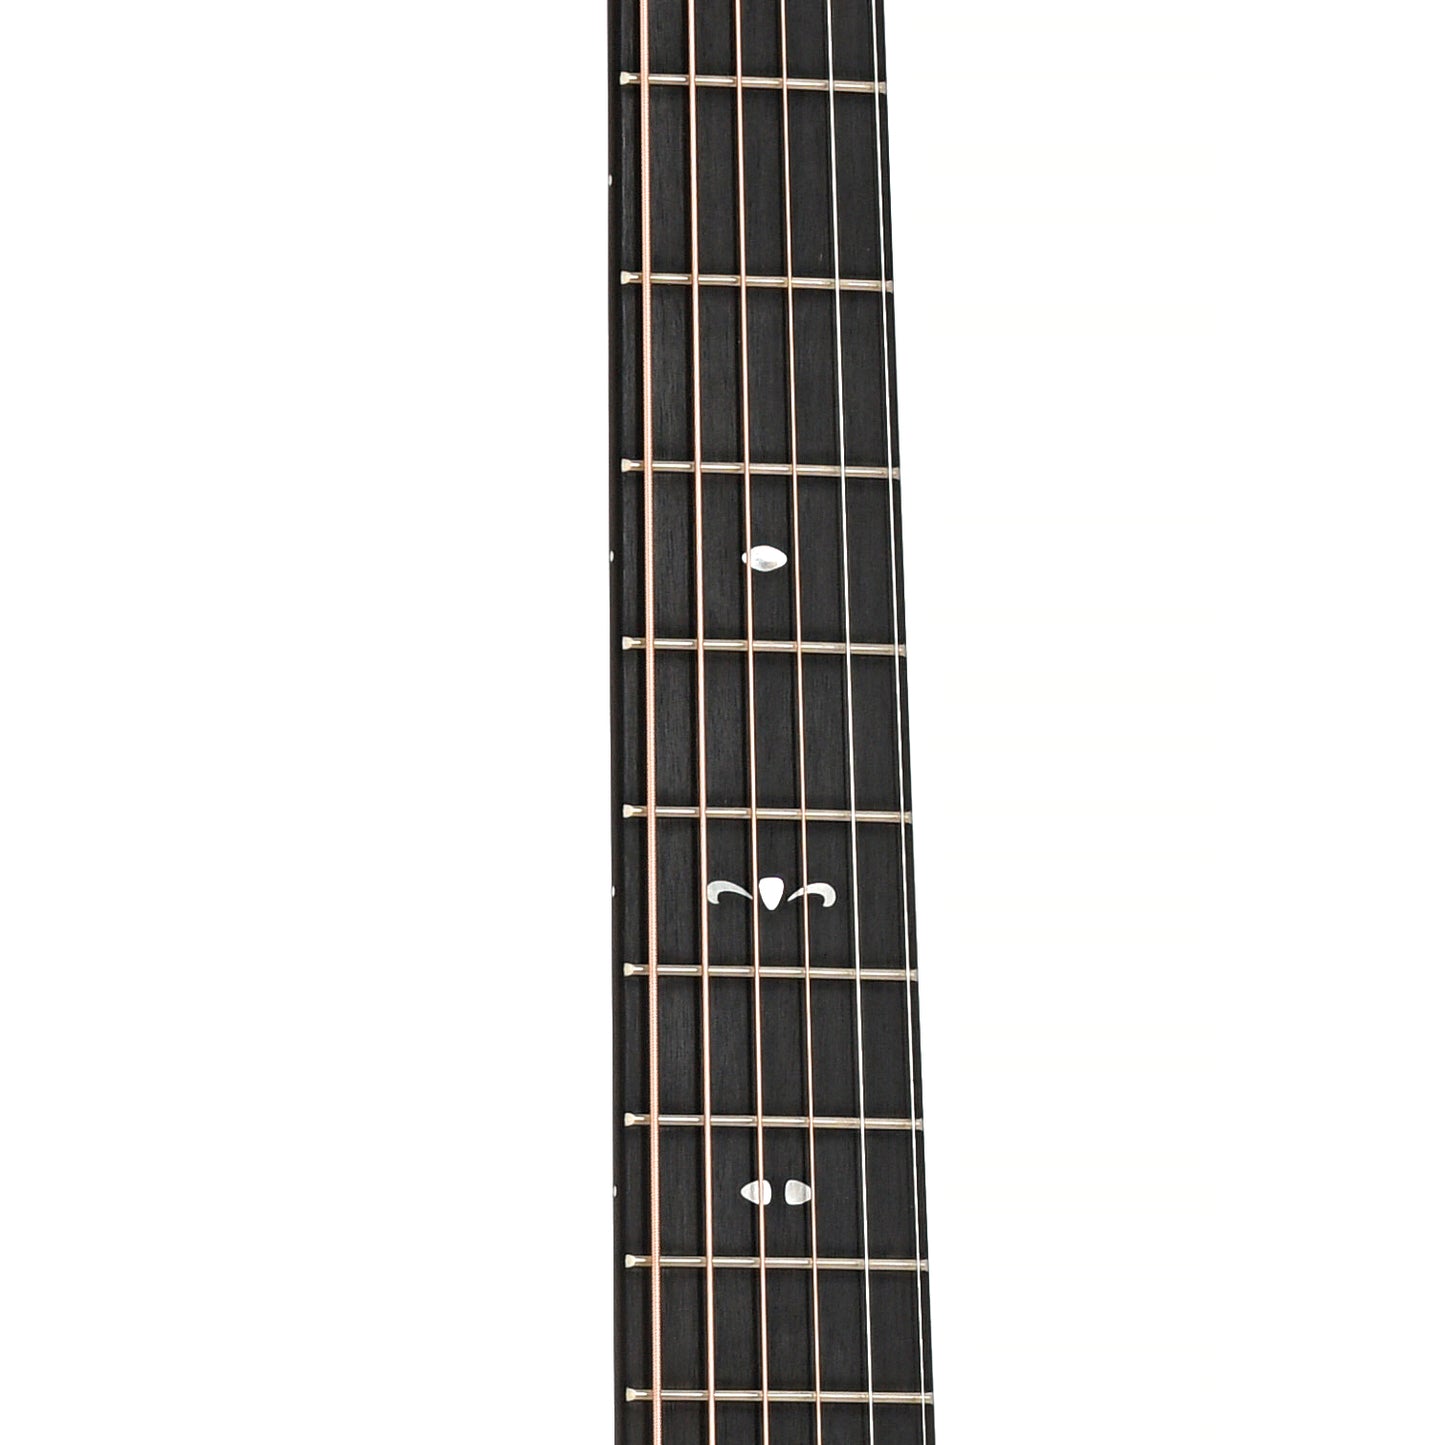 Fretboard of Taylor 722ce Acoustic Guitar